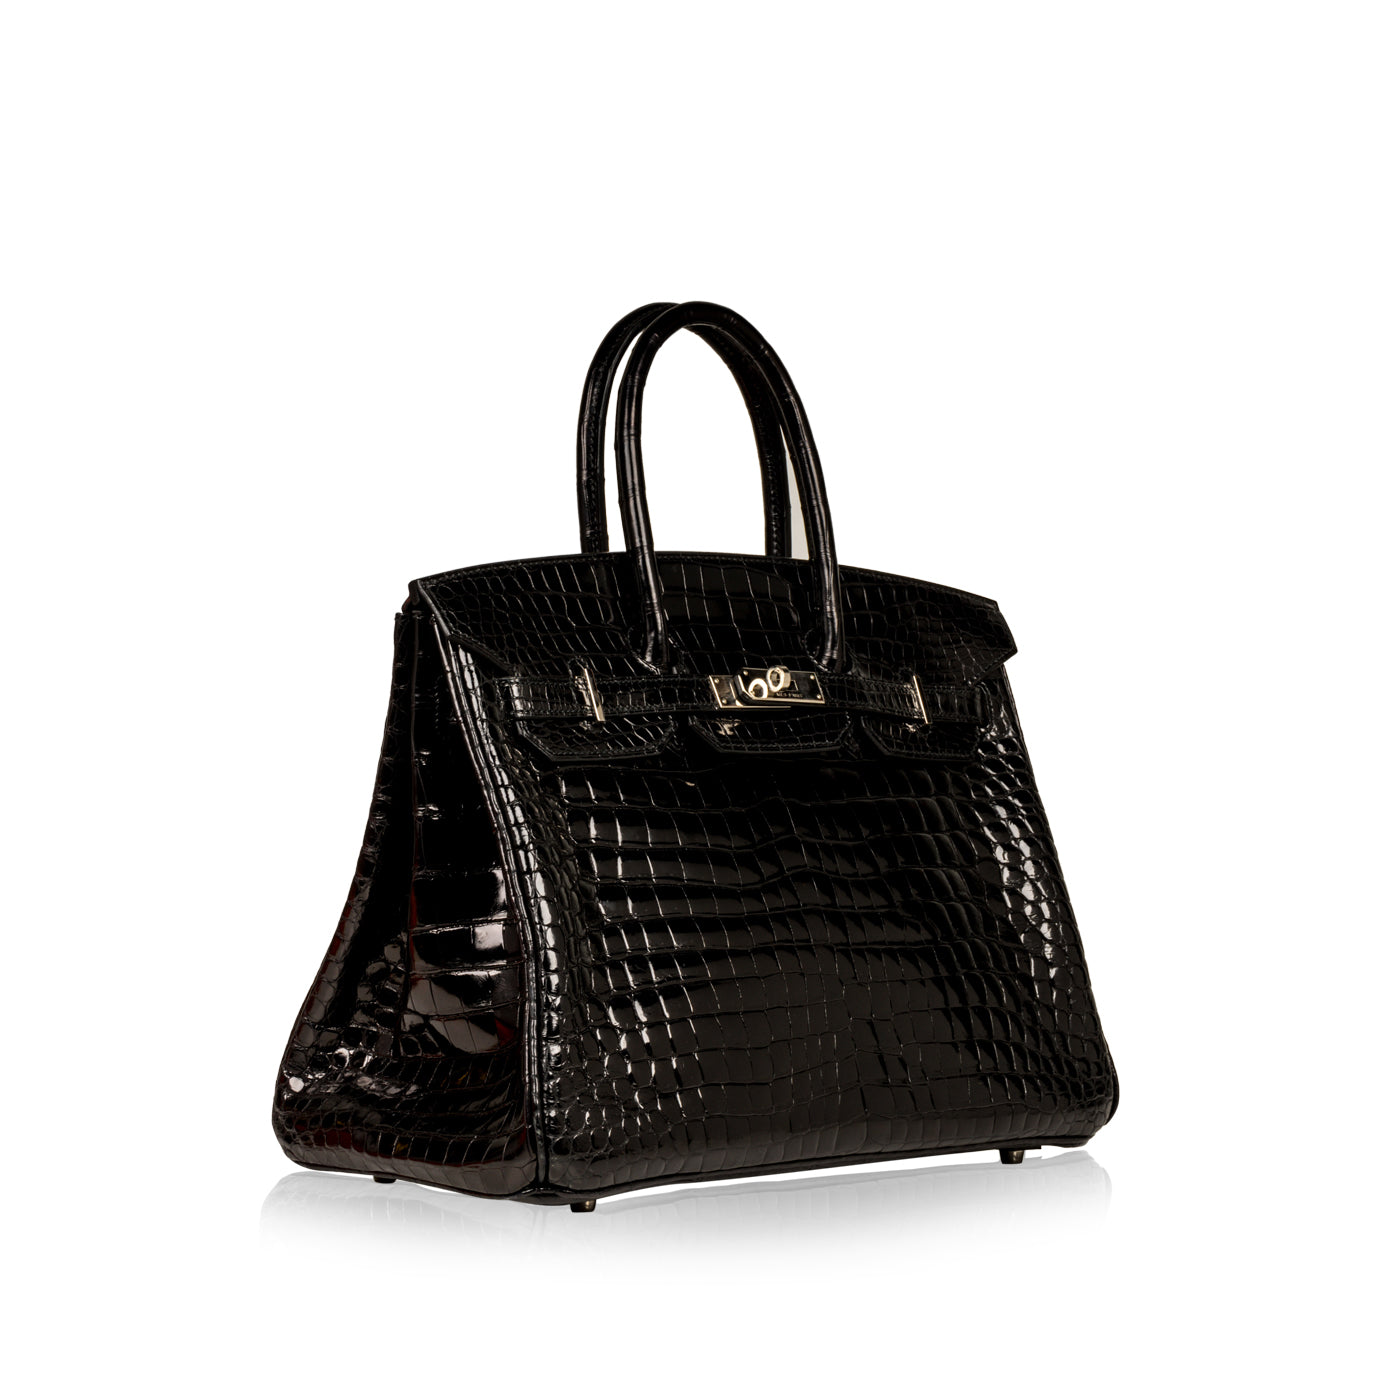 Naughtipidgins Nest - Hermés Birkin 35cm Noir in Chèvre de Coromandel with  Brushed Palladium Hardware. If ever there was a most prudent choice for a  Birkin, this utterly stunning piece is the